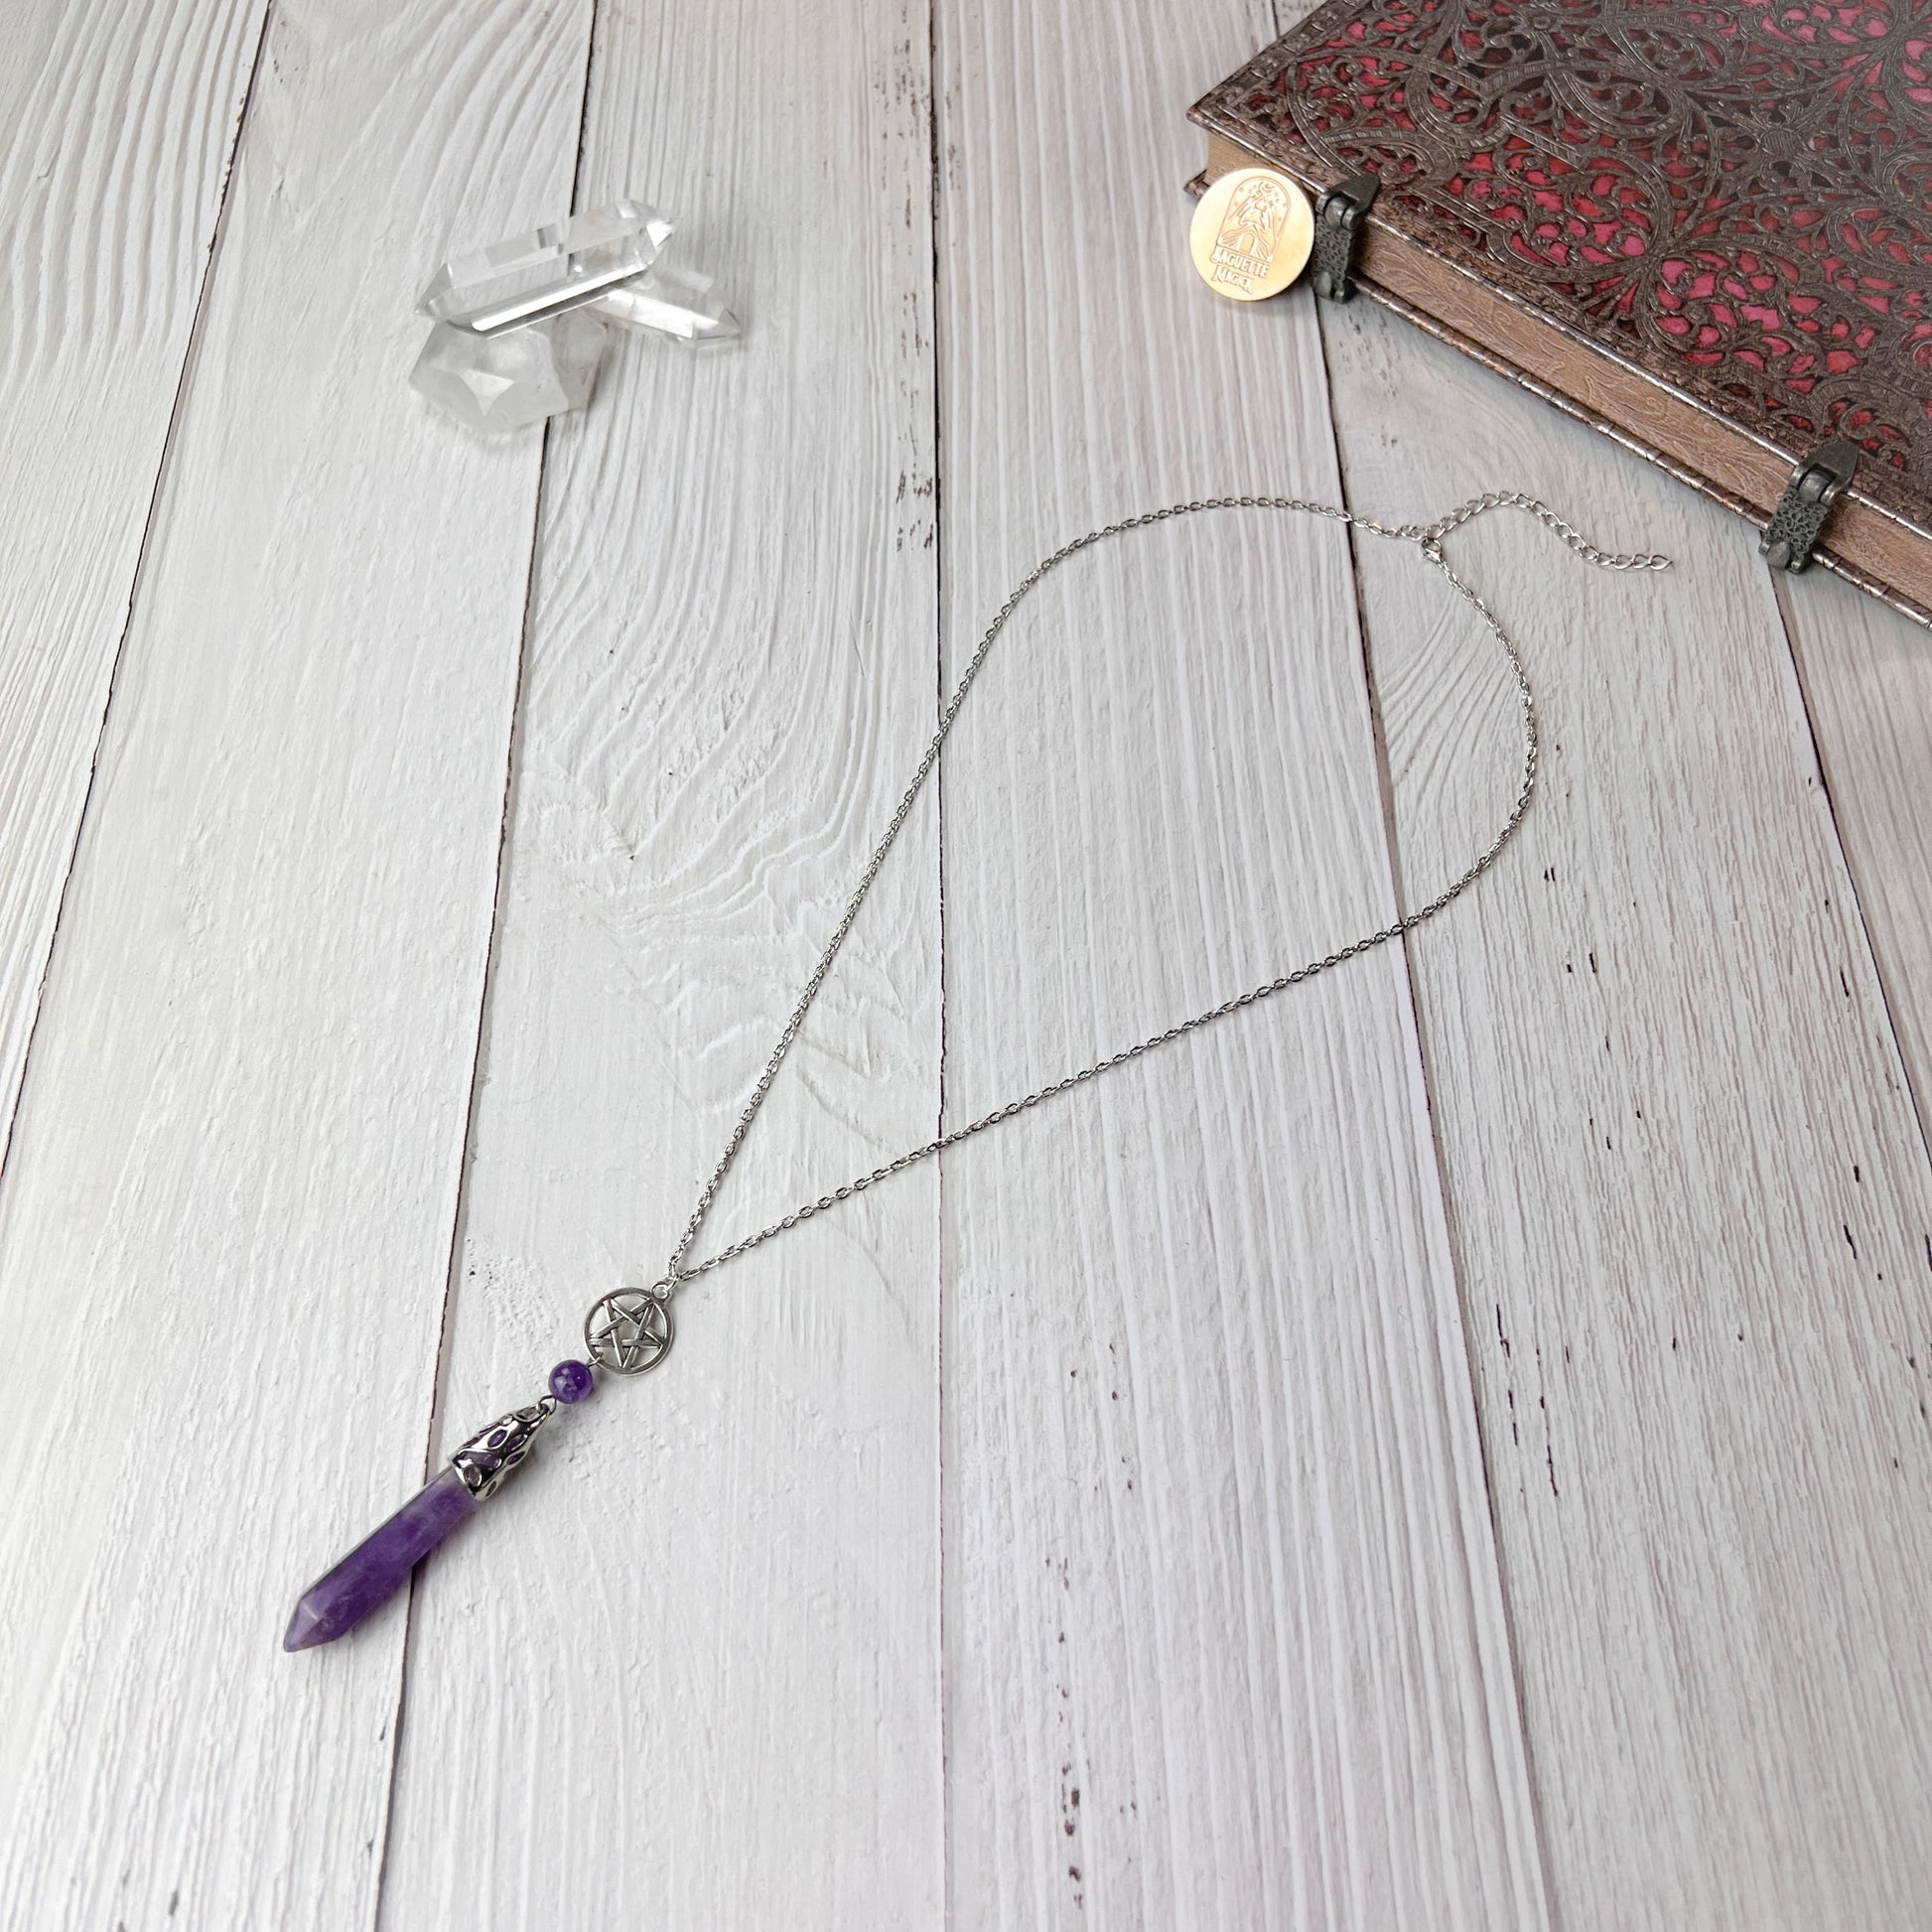 pentacle necklace amethyst pentacle for dowsing divination celtic pagan wiccan witchcraft jewelry baguette magick